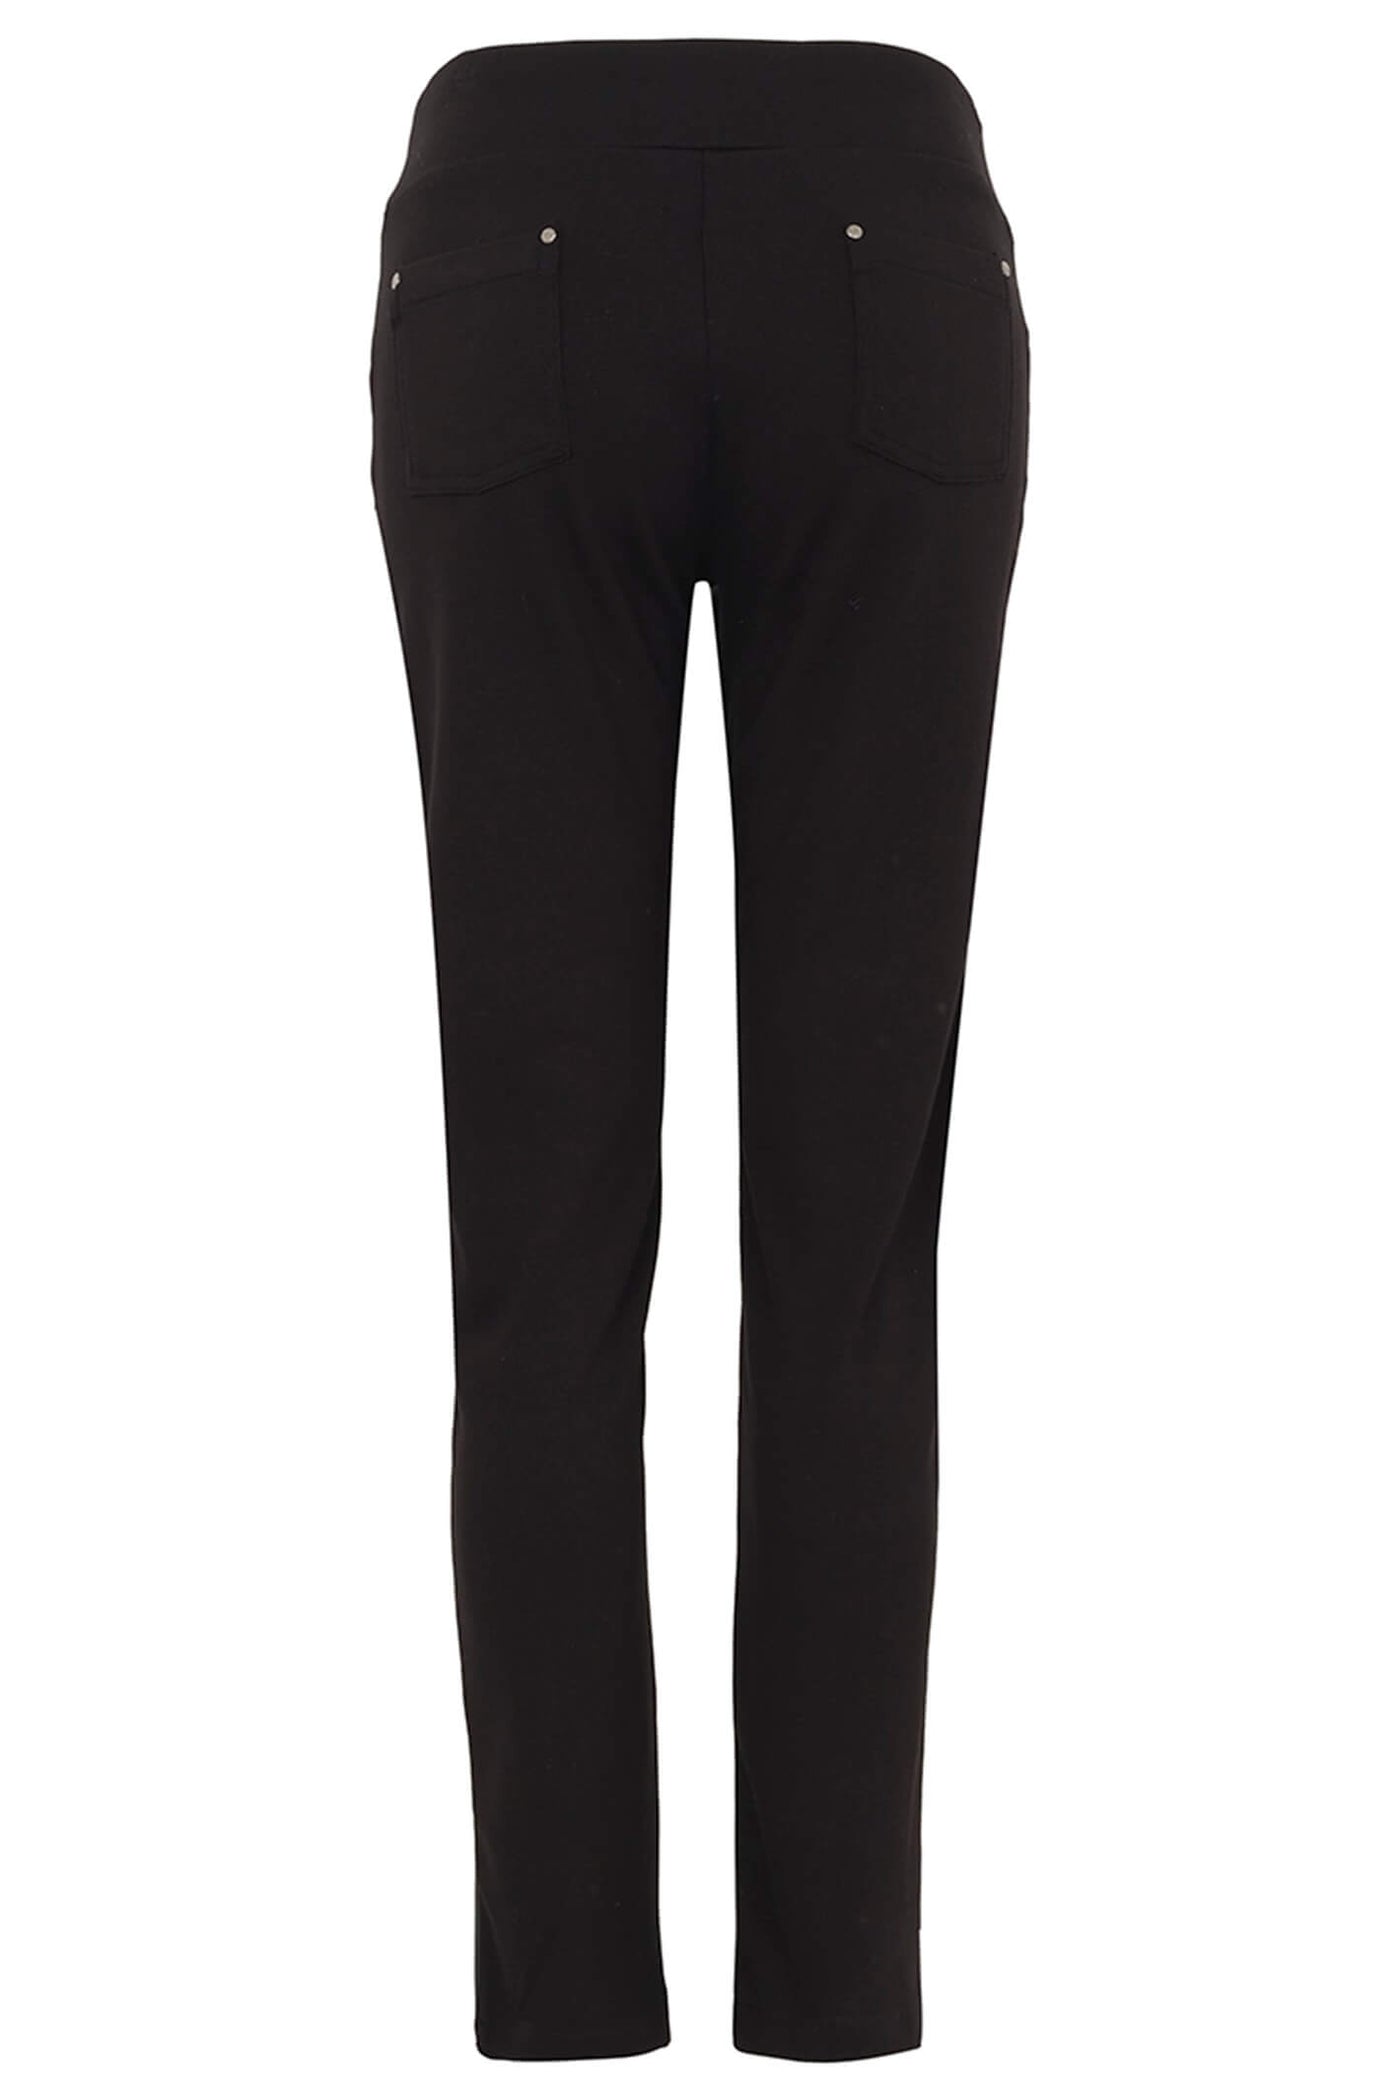 Dolcezza 73115 Black Pleather Front Pull On Trousers - Rouge Boutique